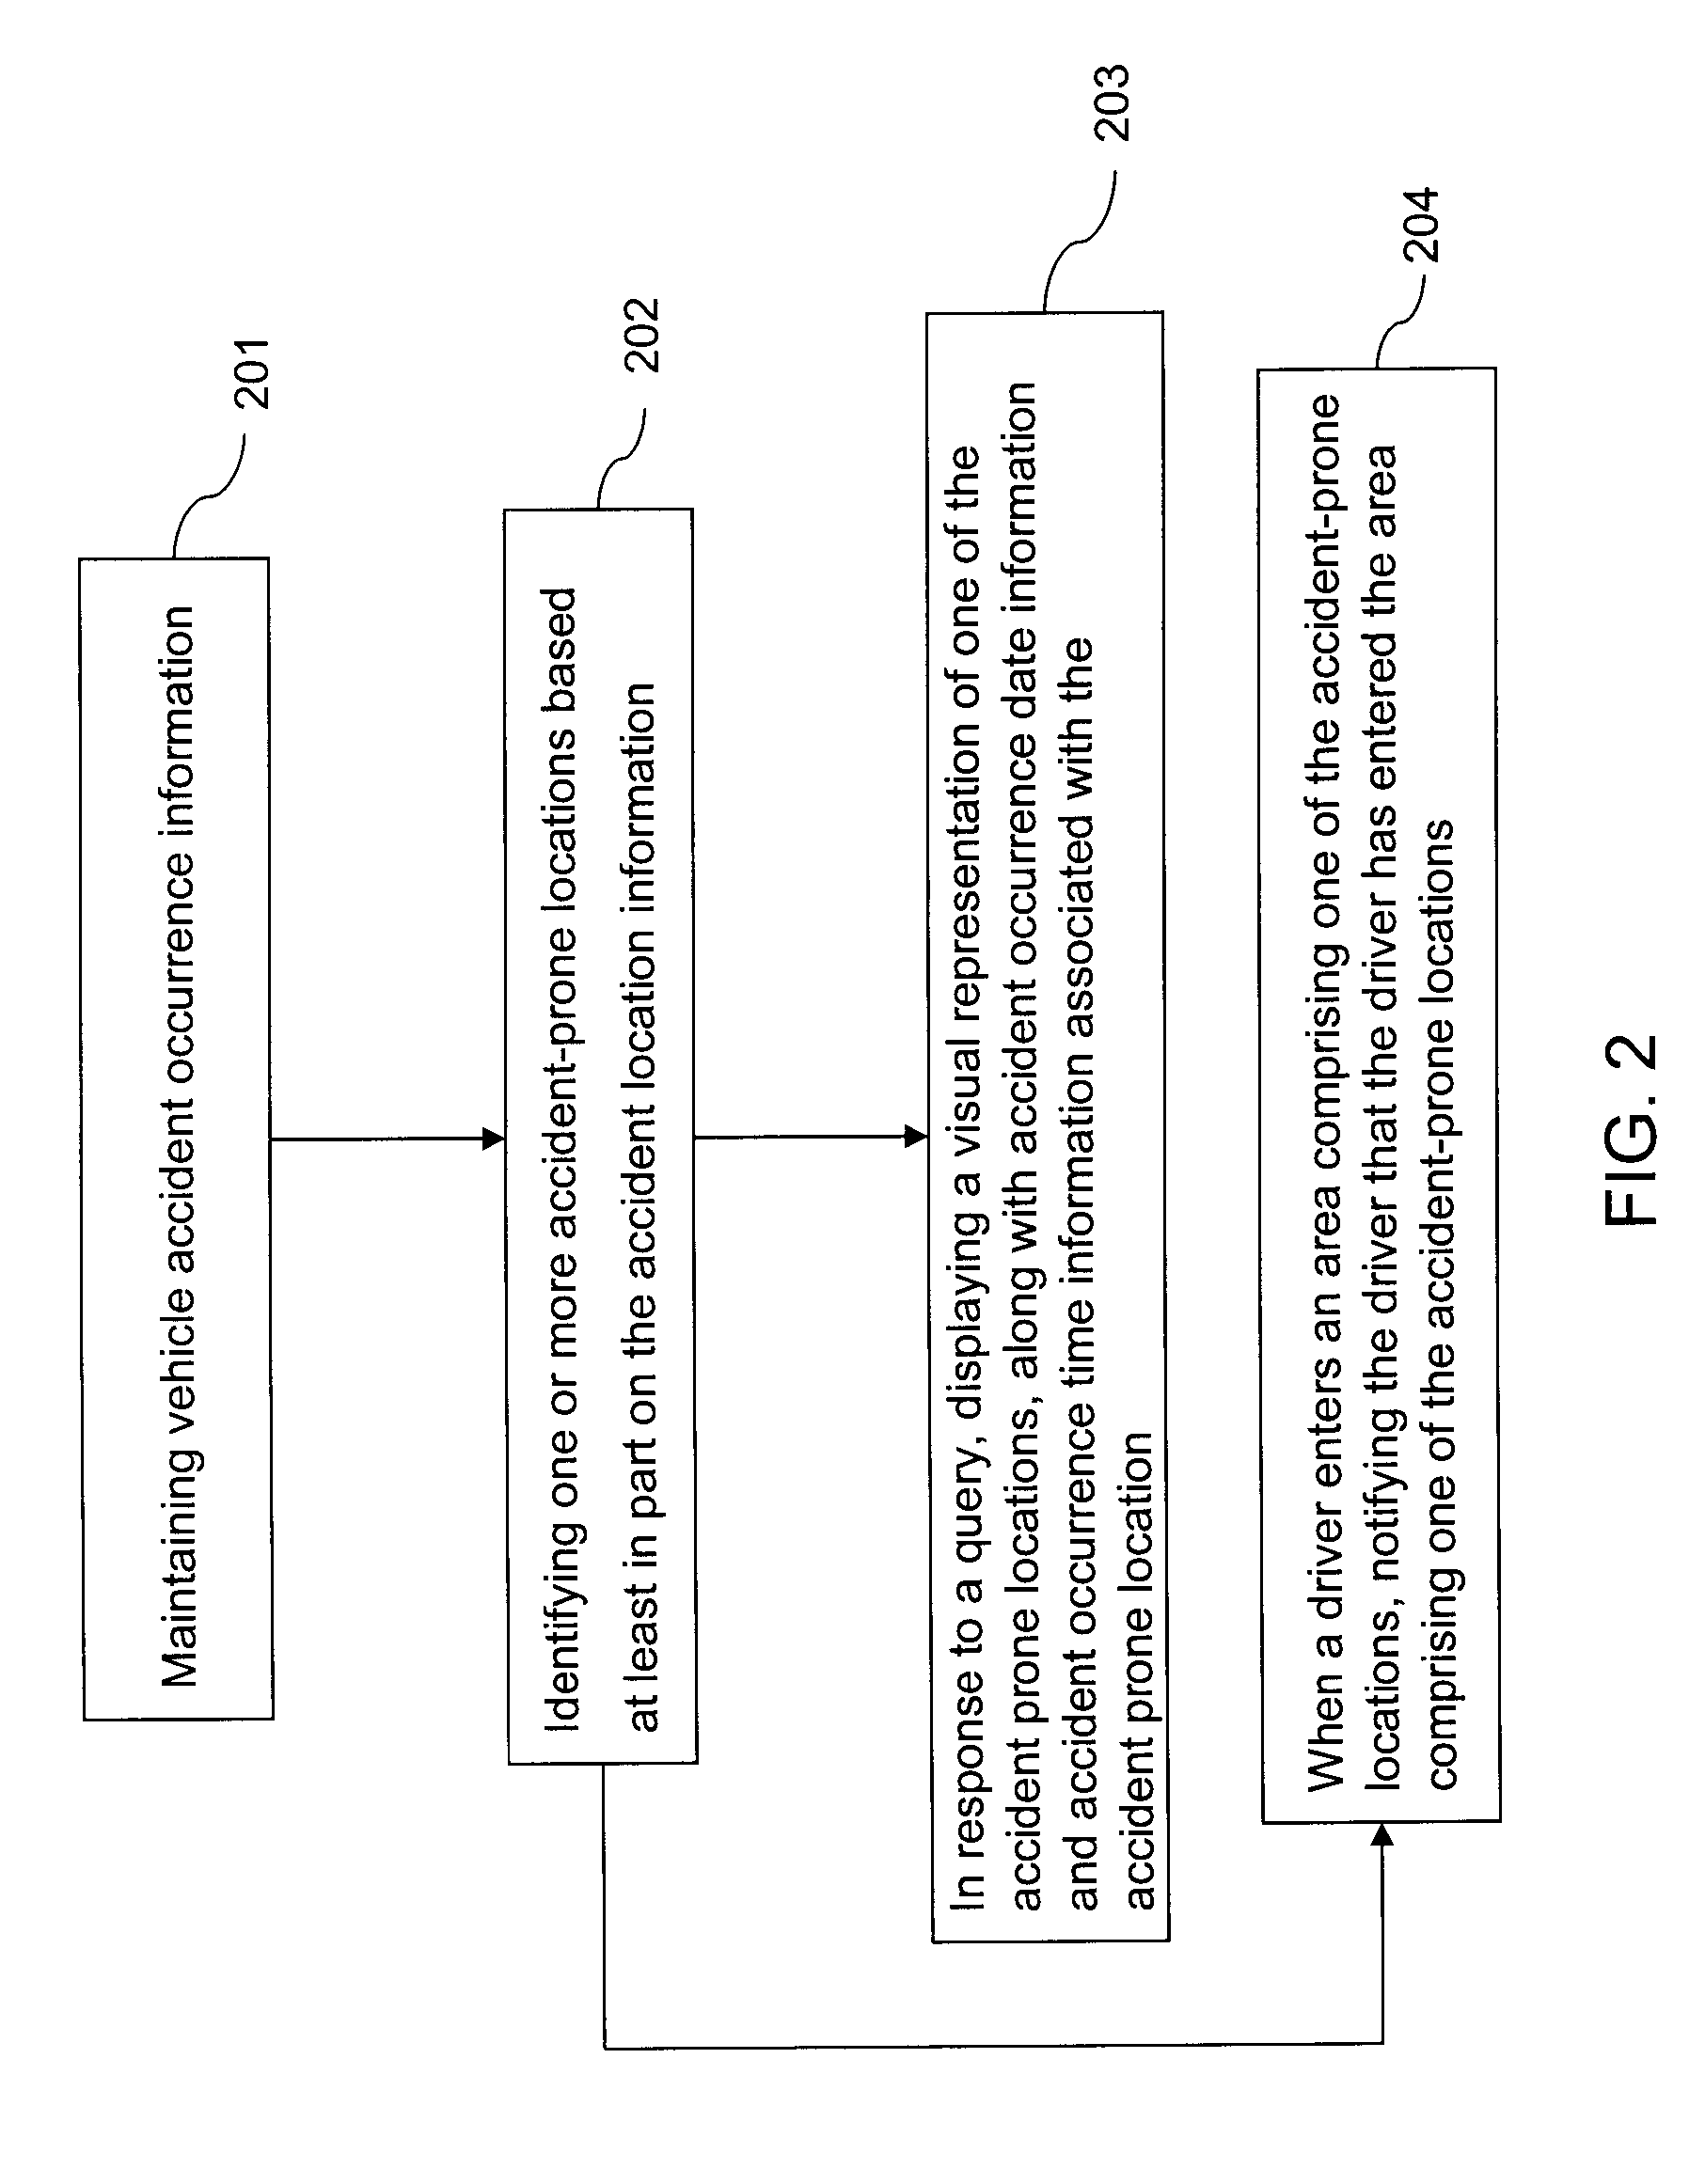 Accident prone location notification system and method